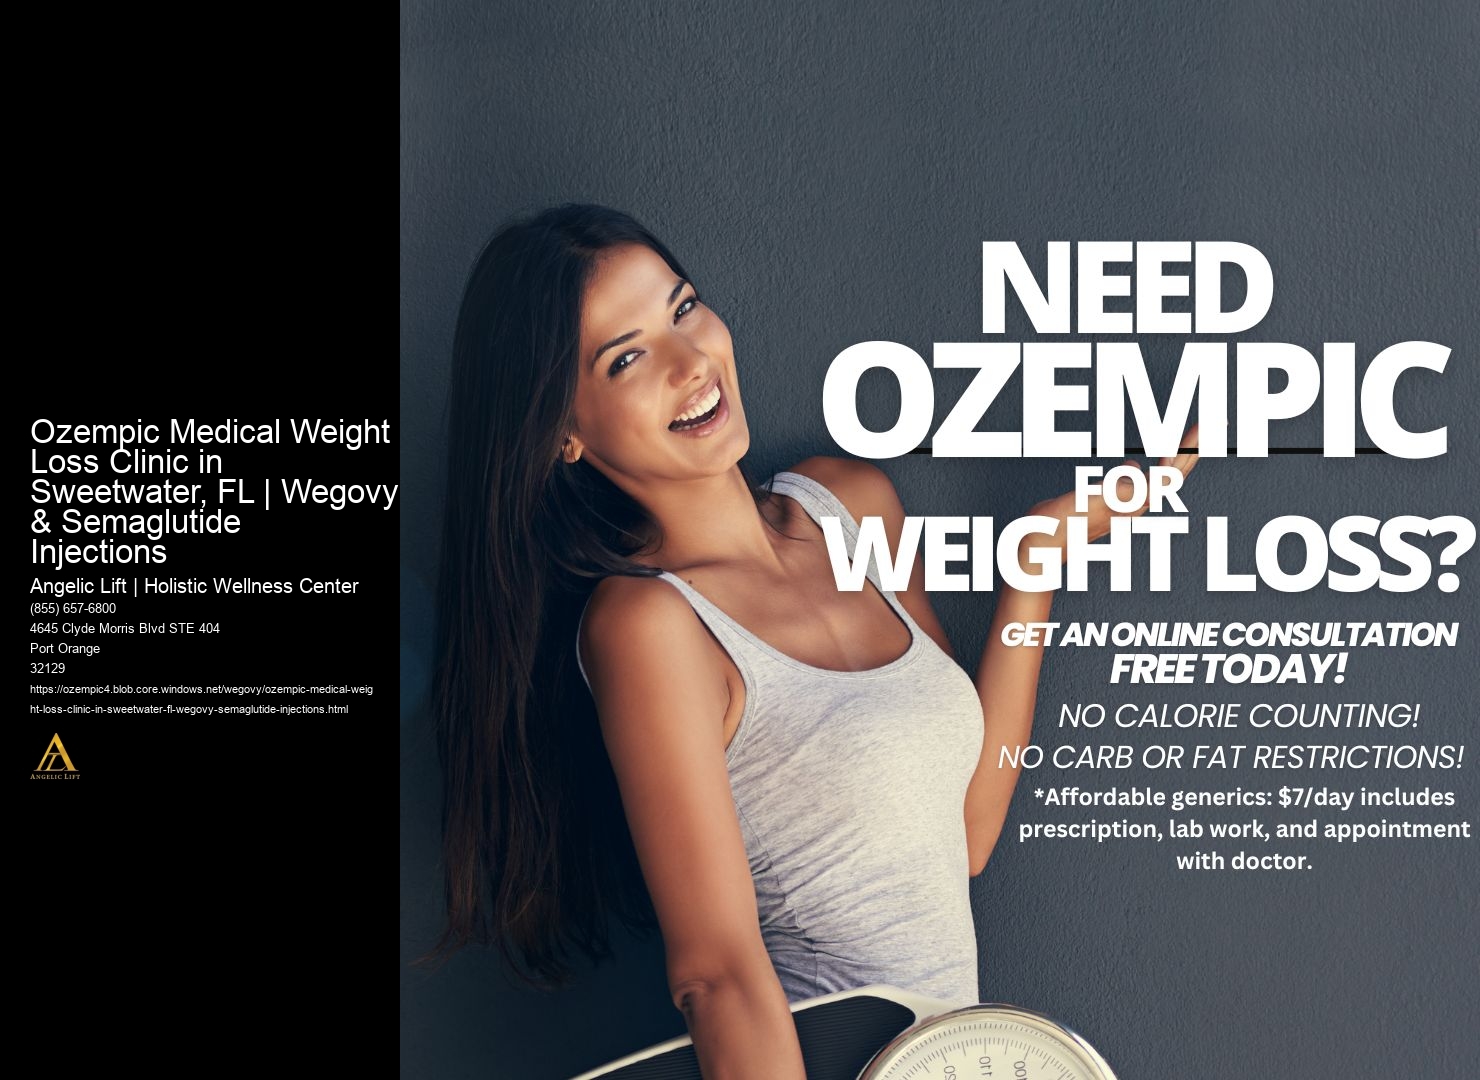 Ozempic Medical Weight Loss Clinic in Sweetwater, FL | Wegovy & Semaglutide Injections